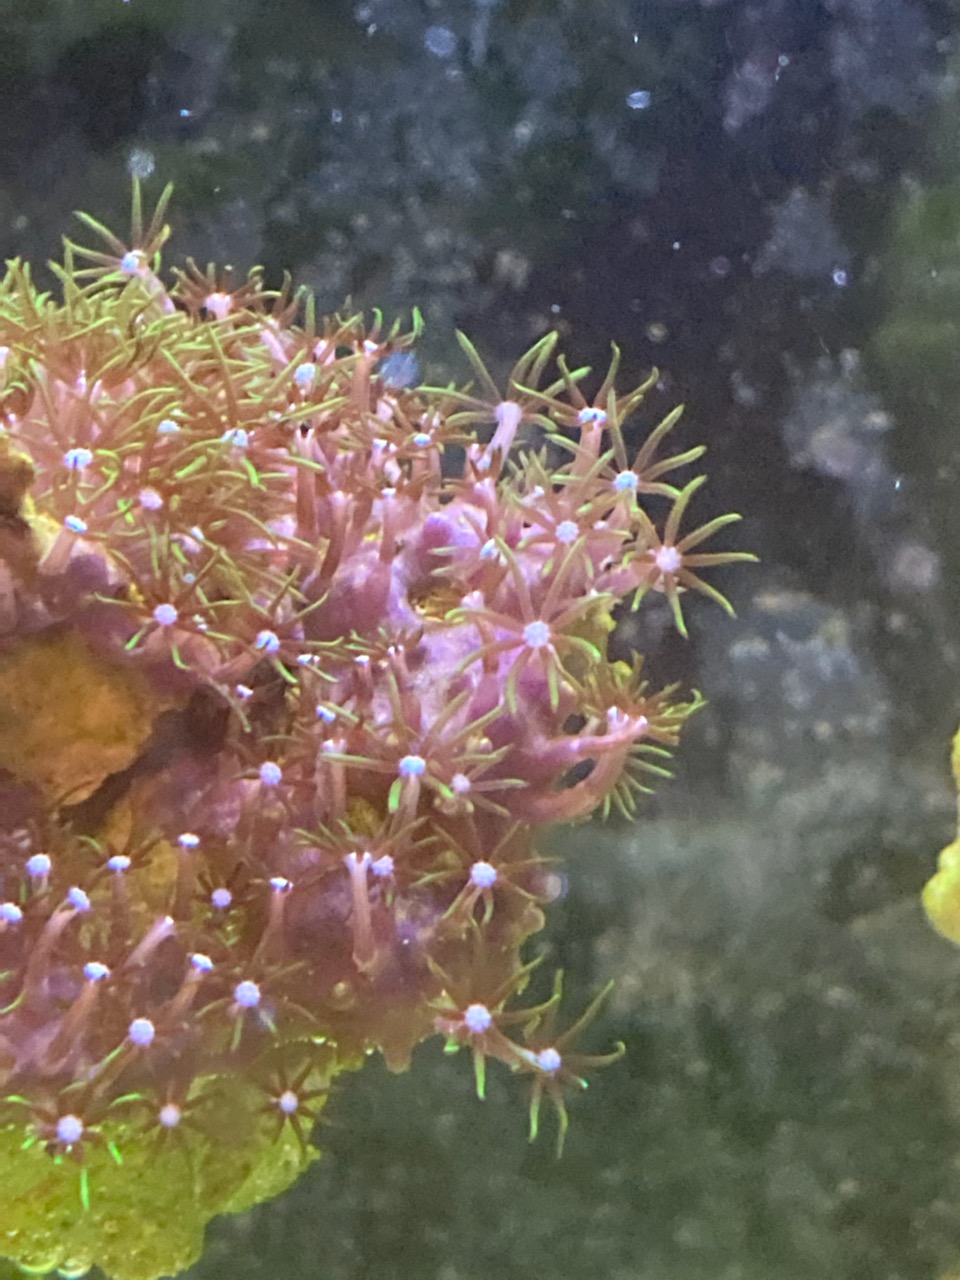 green star polyp coral